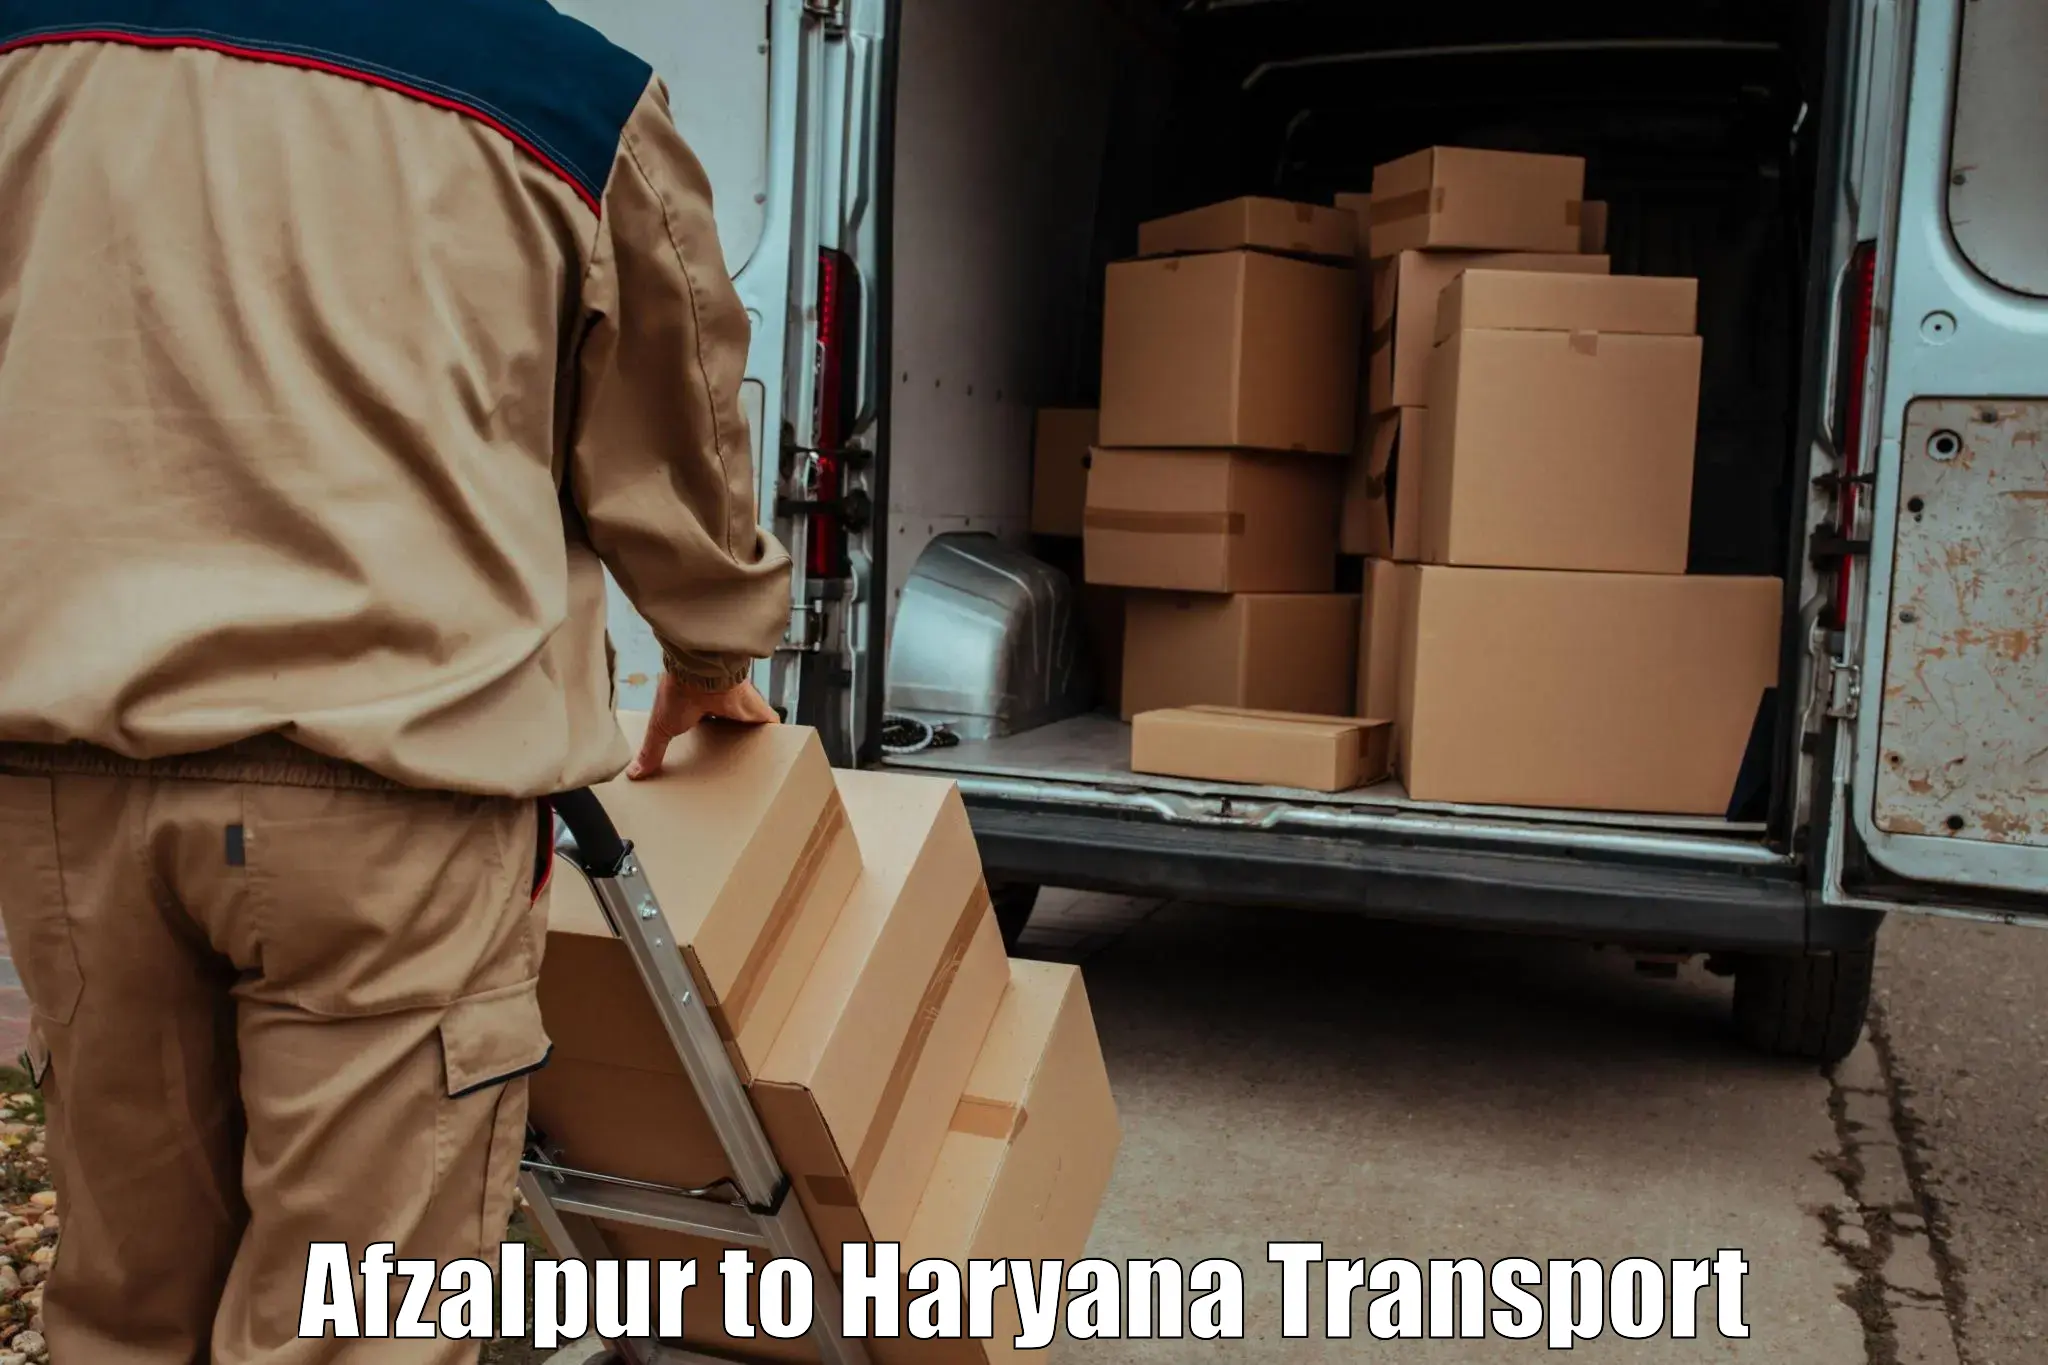 Air freight transport services Afzalpur to Charkhi Dadri